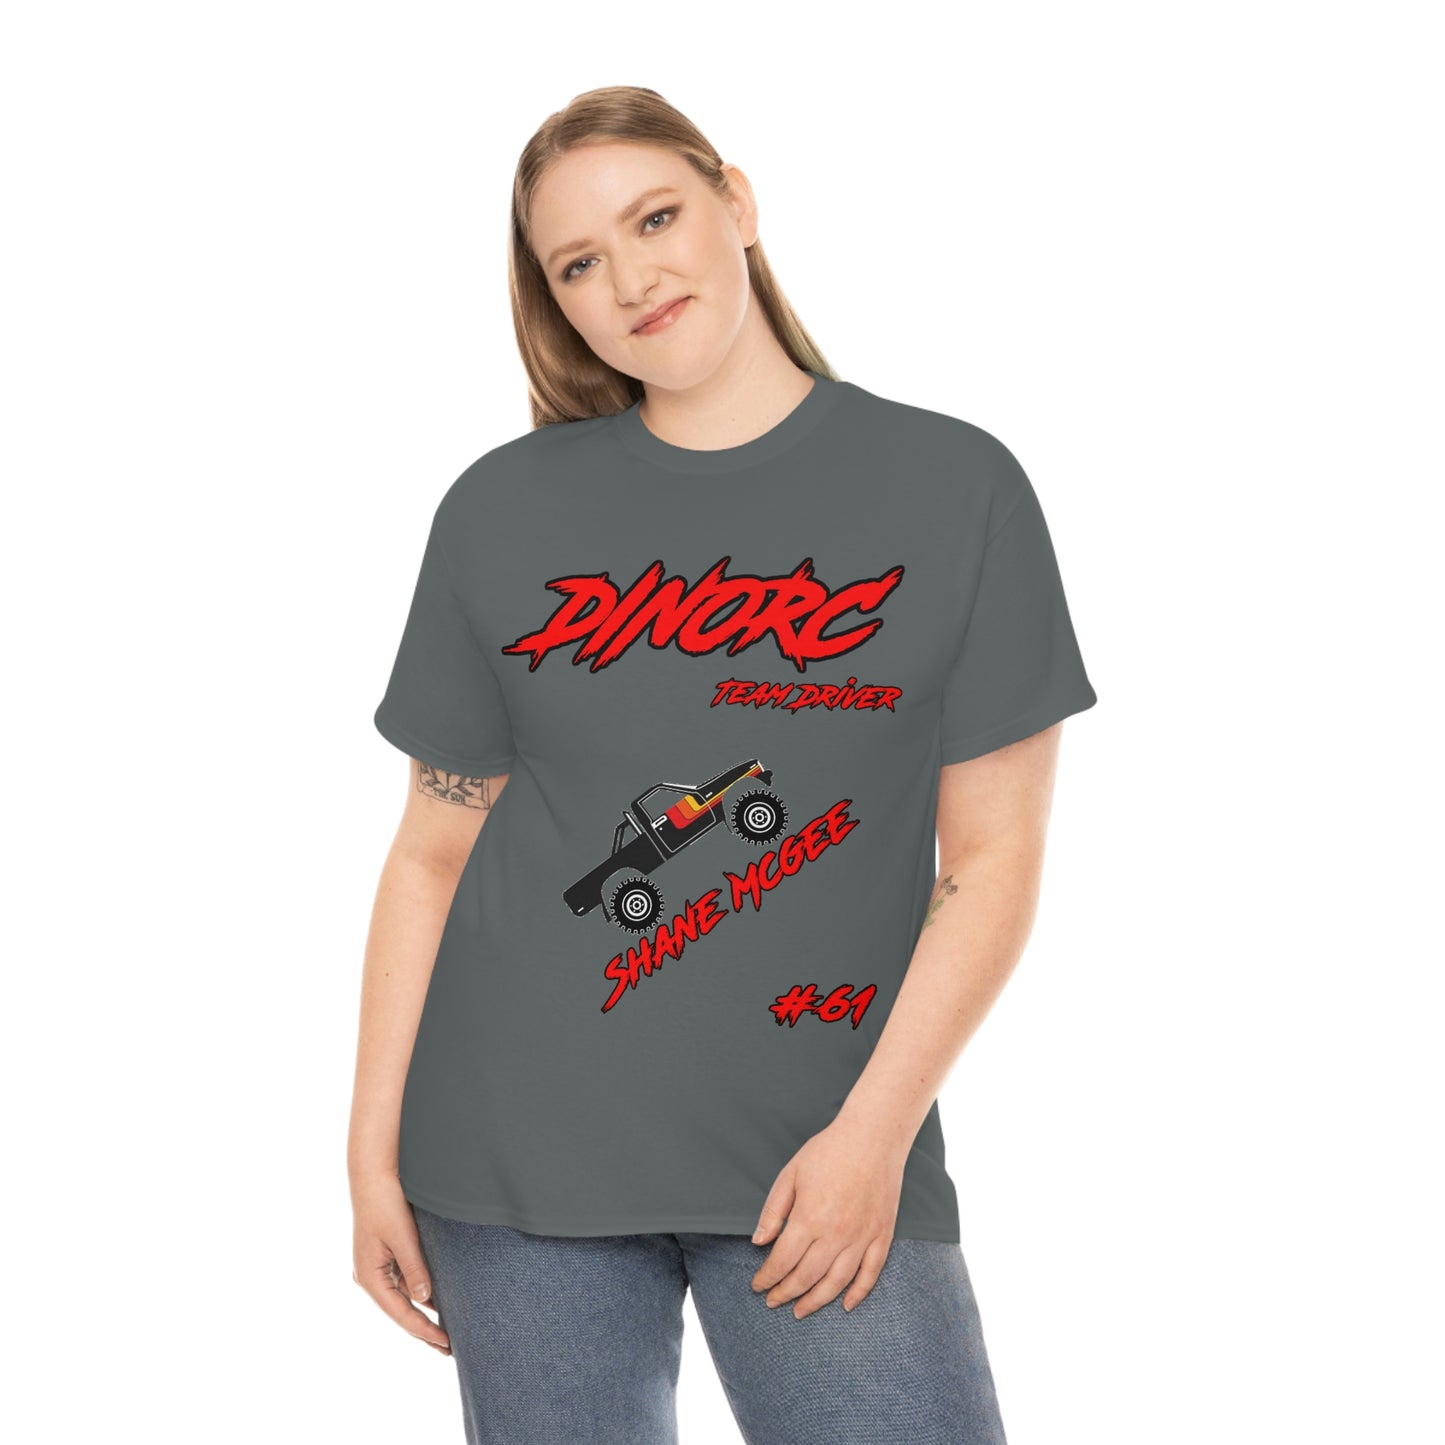 Team Driver Shane Mcgee truck logo Front and Back DinoRc Logo T-Shirt S-5x 5 colors